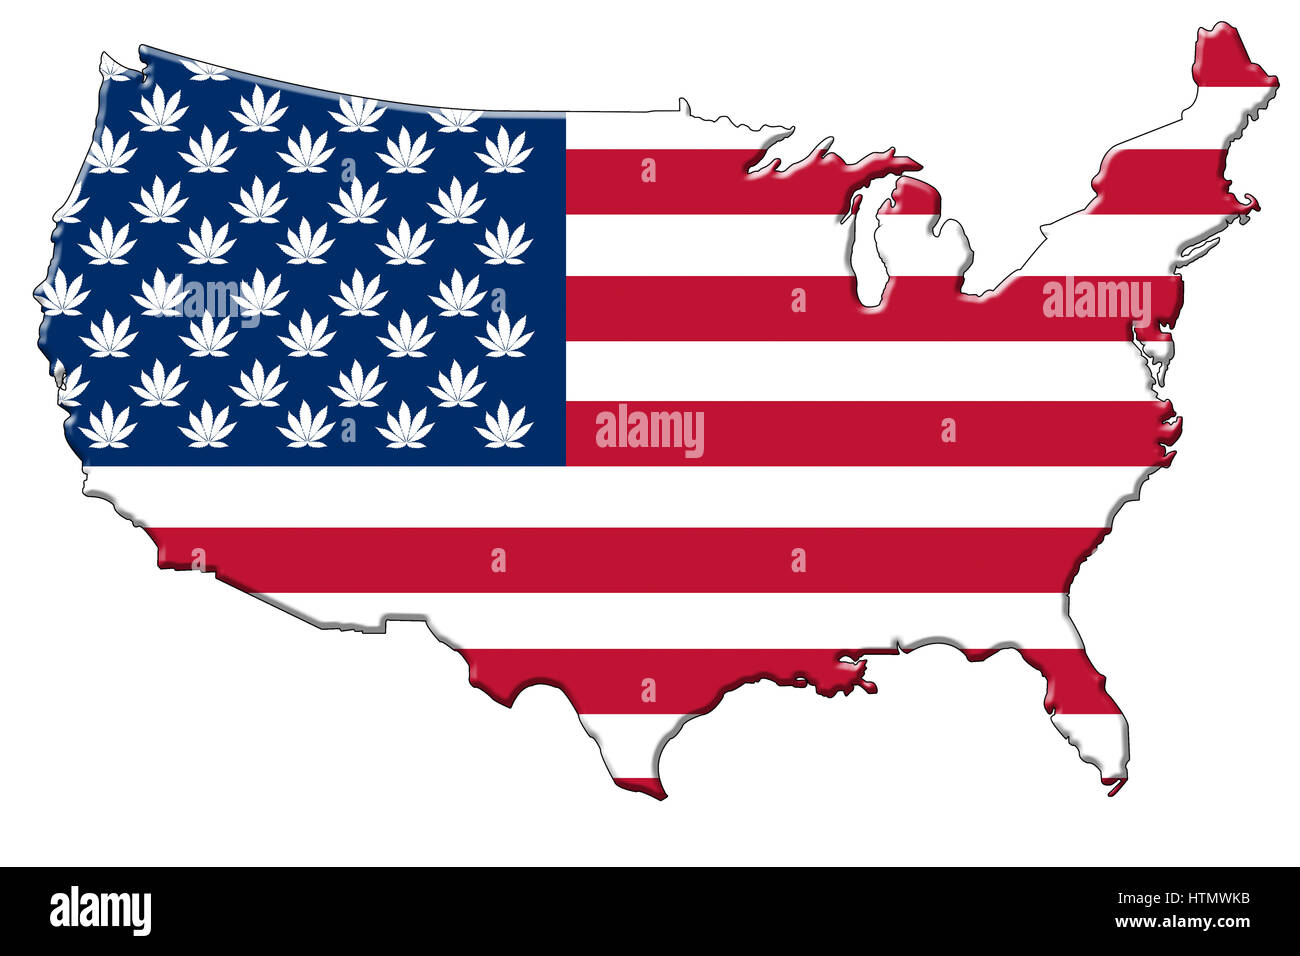 American flag with cannabis leaves instead of stars in the shape of the continent of the USA. Stock Photo